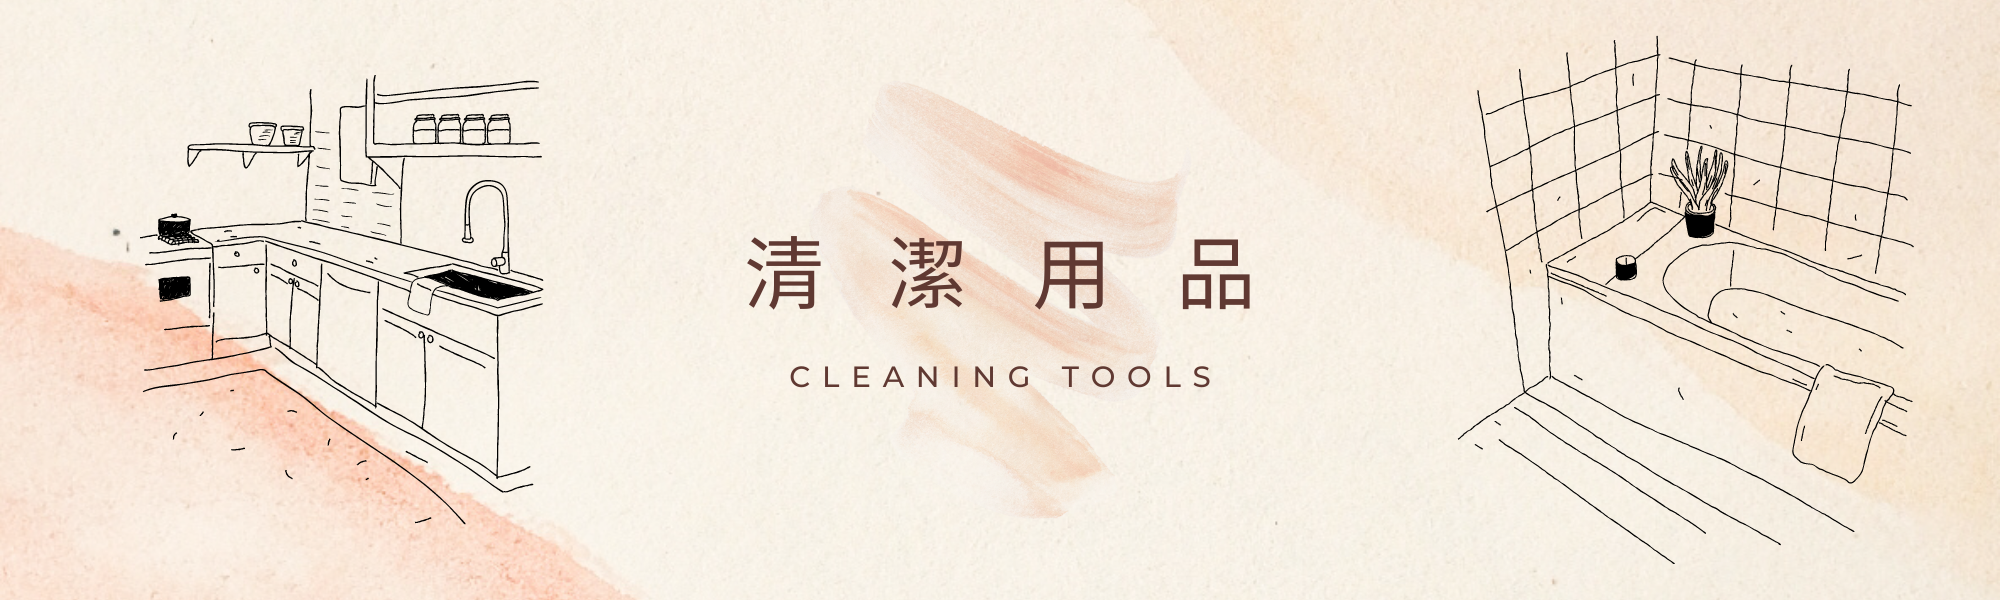 F5 PRESENT | CLEANING TOOLS